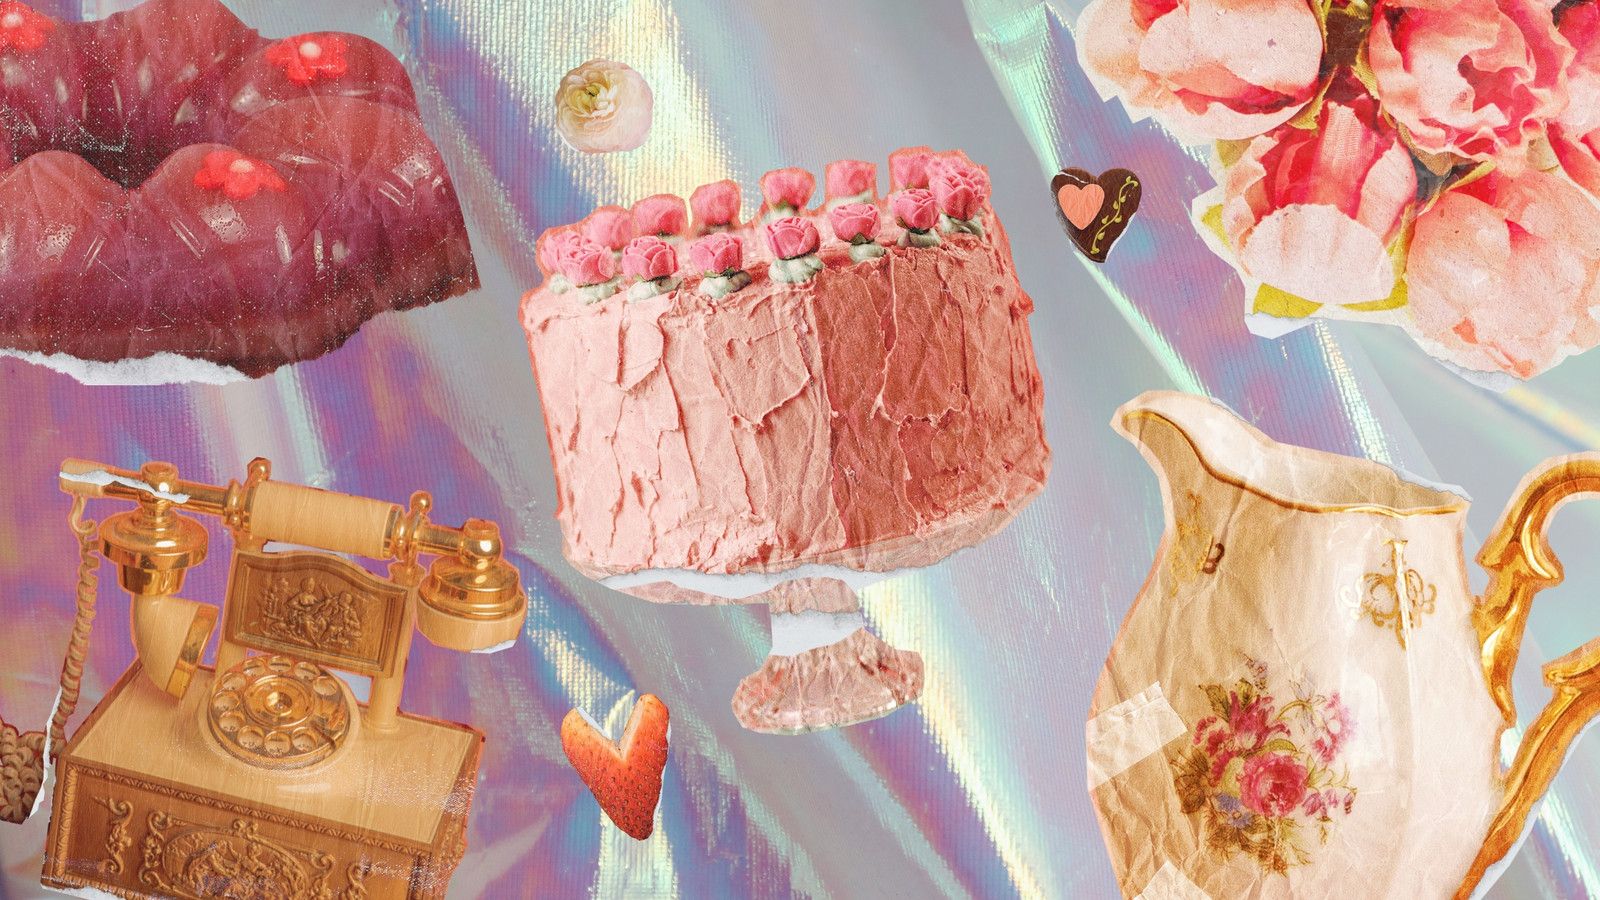 A collage of a cake, a phone, a vase, and flowers on a rainbow background - Cake